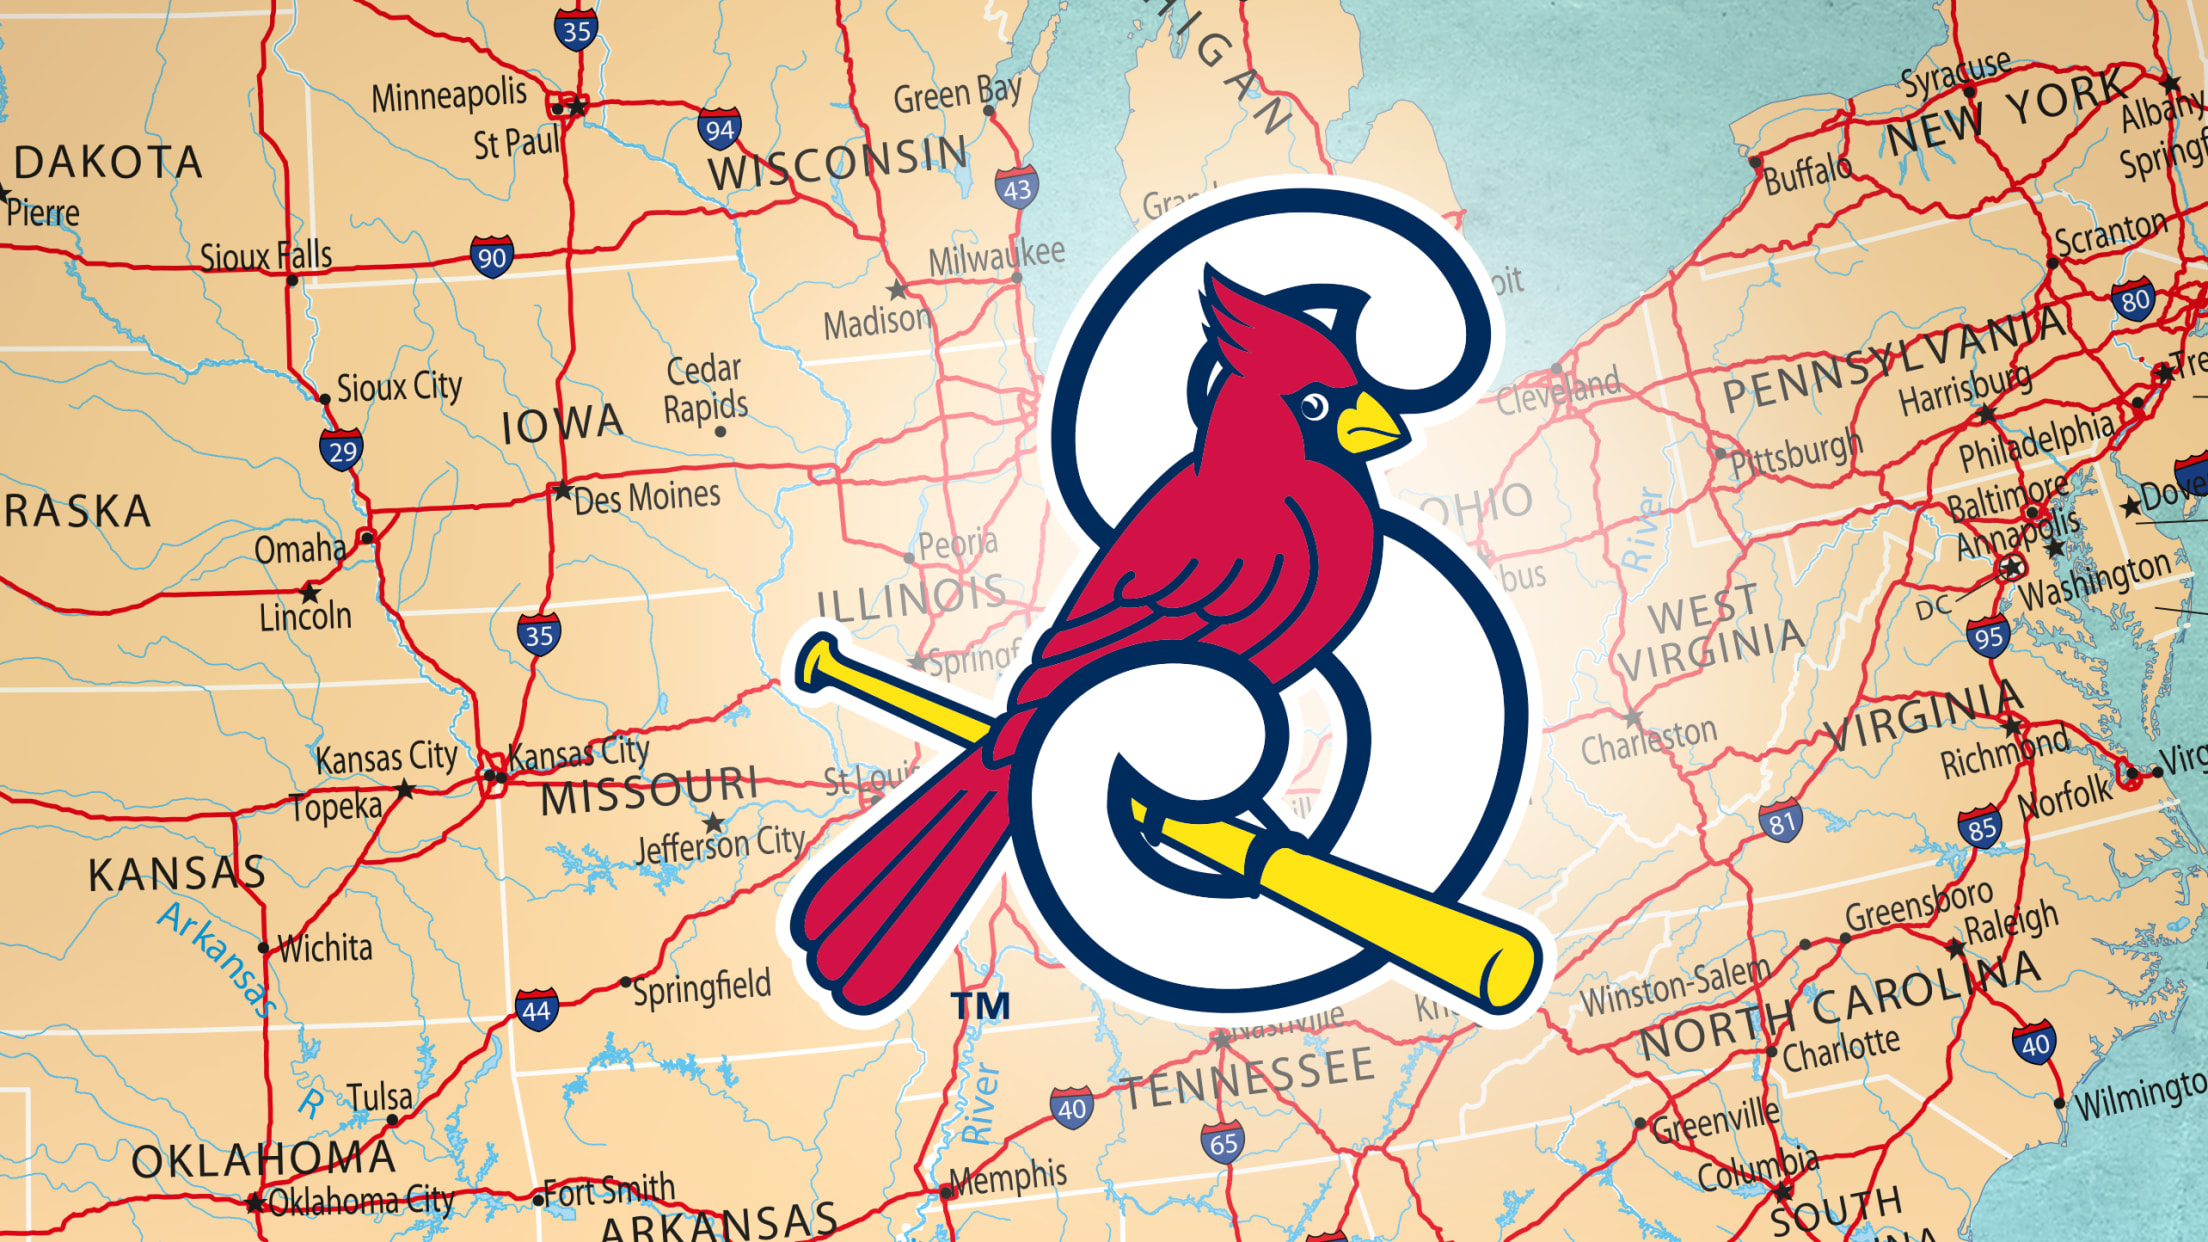 Springfield Cardinals hold Opening Day after city purchased stadium